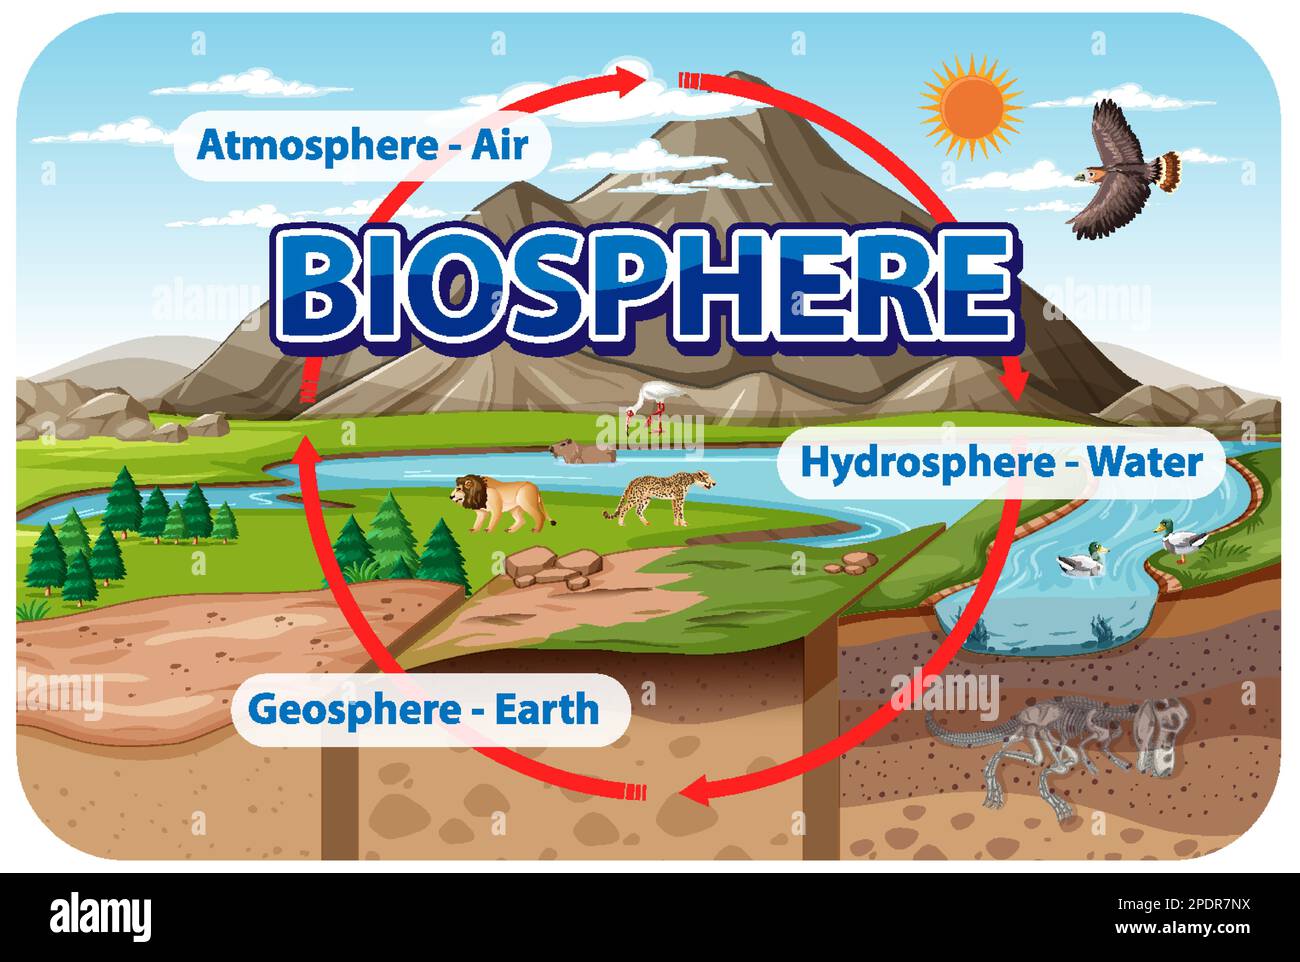 Biosphere Ecology Infographic for Learning illustration Stock